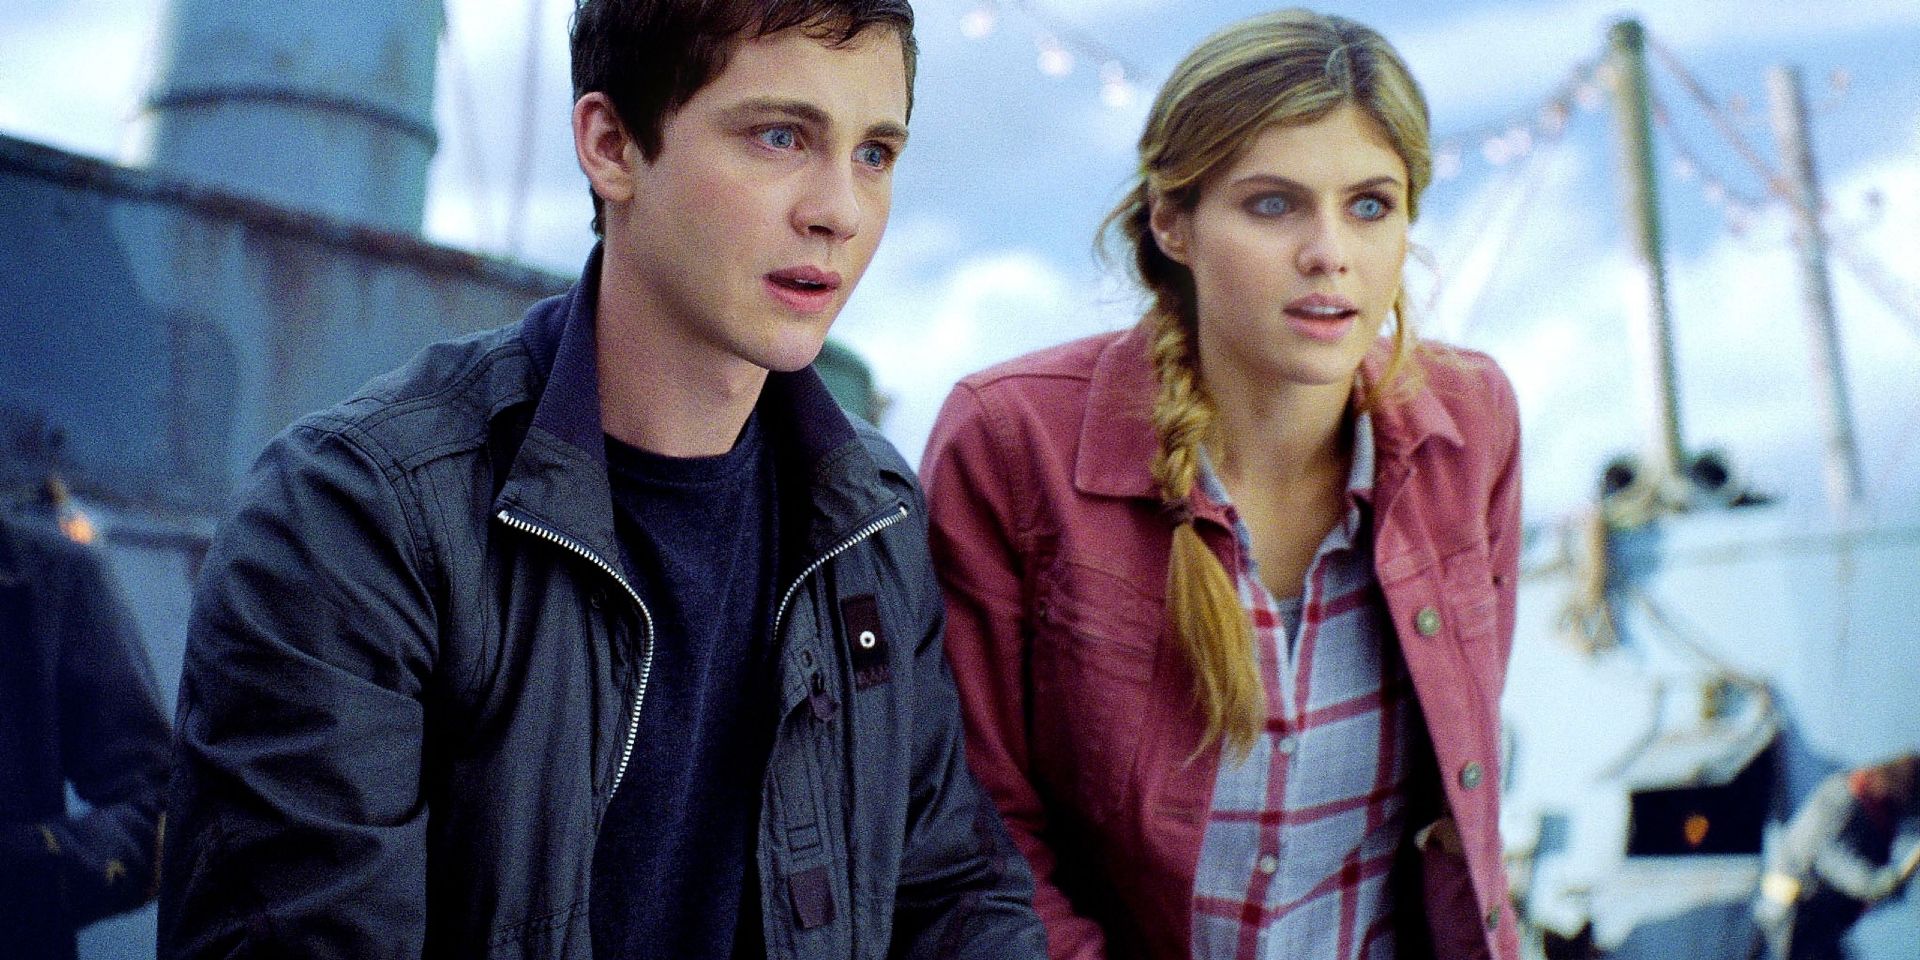 A still from one of the Percy Jackson movies.